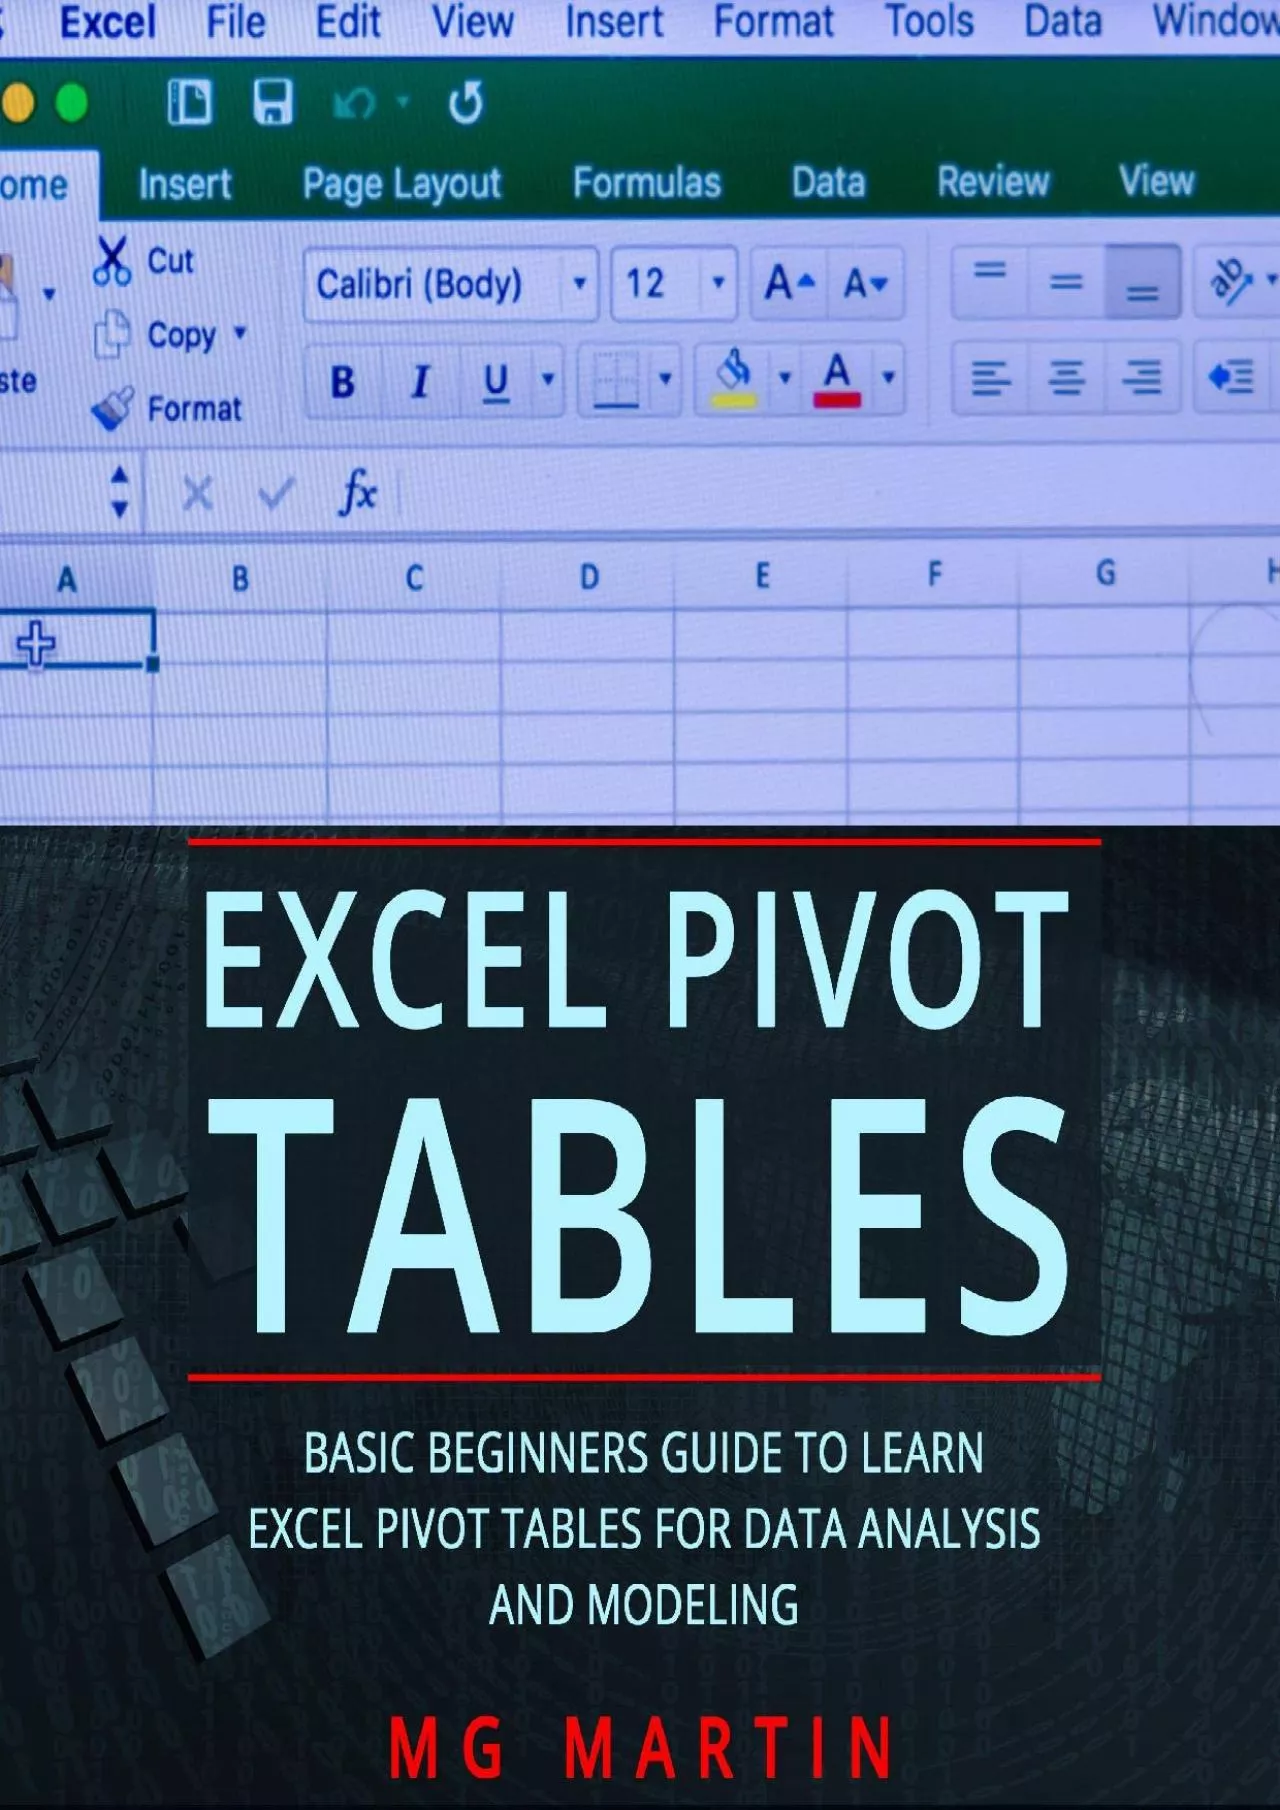 Excel Pivot Tables: Basic Beginners Guide to Learn Excel Pivot Tables for Data Analysis